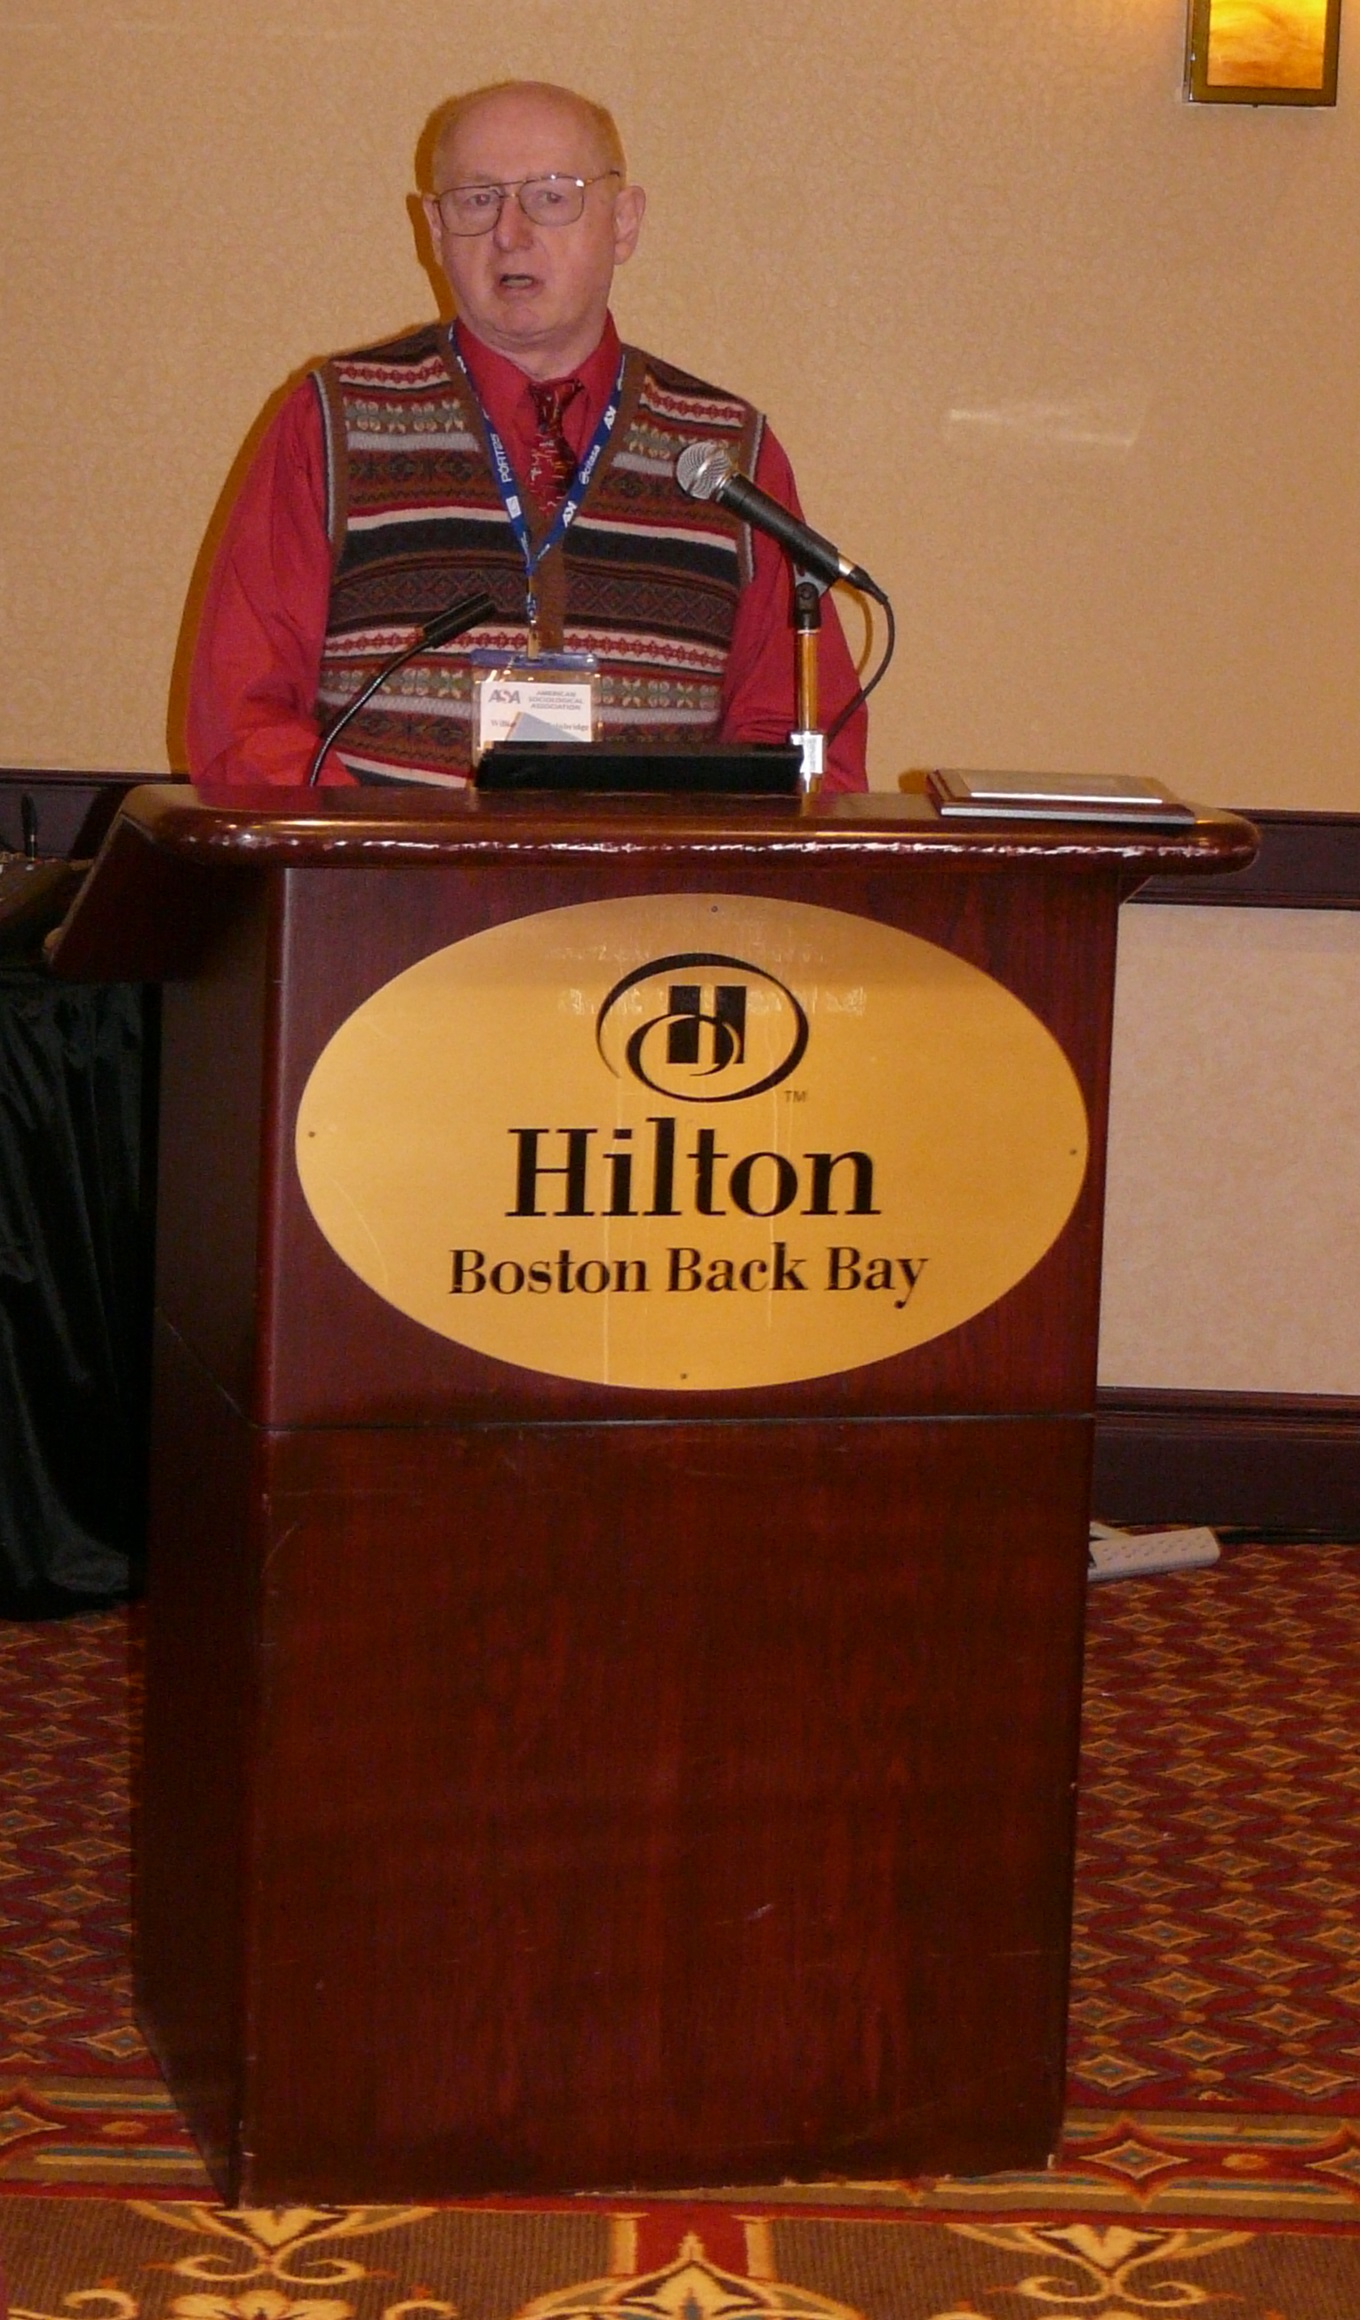 Award ceremony for William Sims Bainbridge held by the CITASA section of ASA. 2008 in Boston.